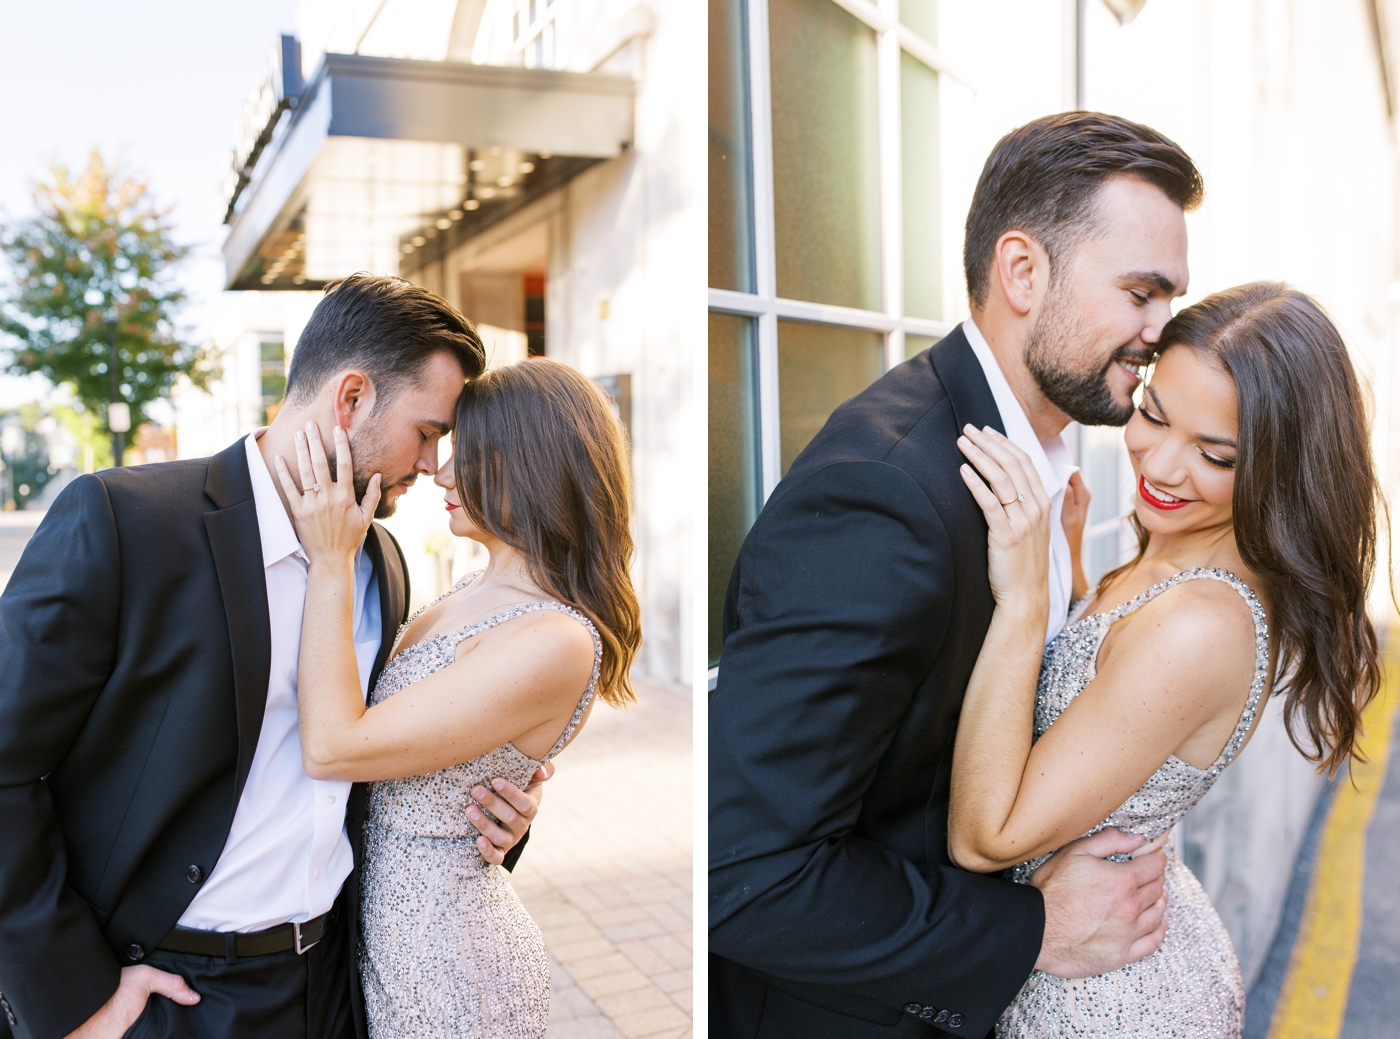 Formal engagement session in downtown Morgantown